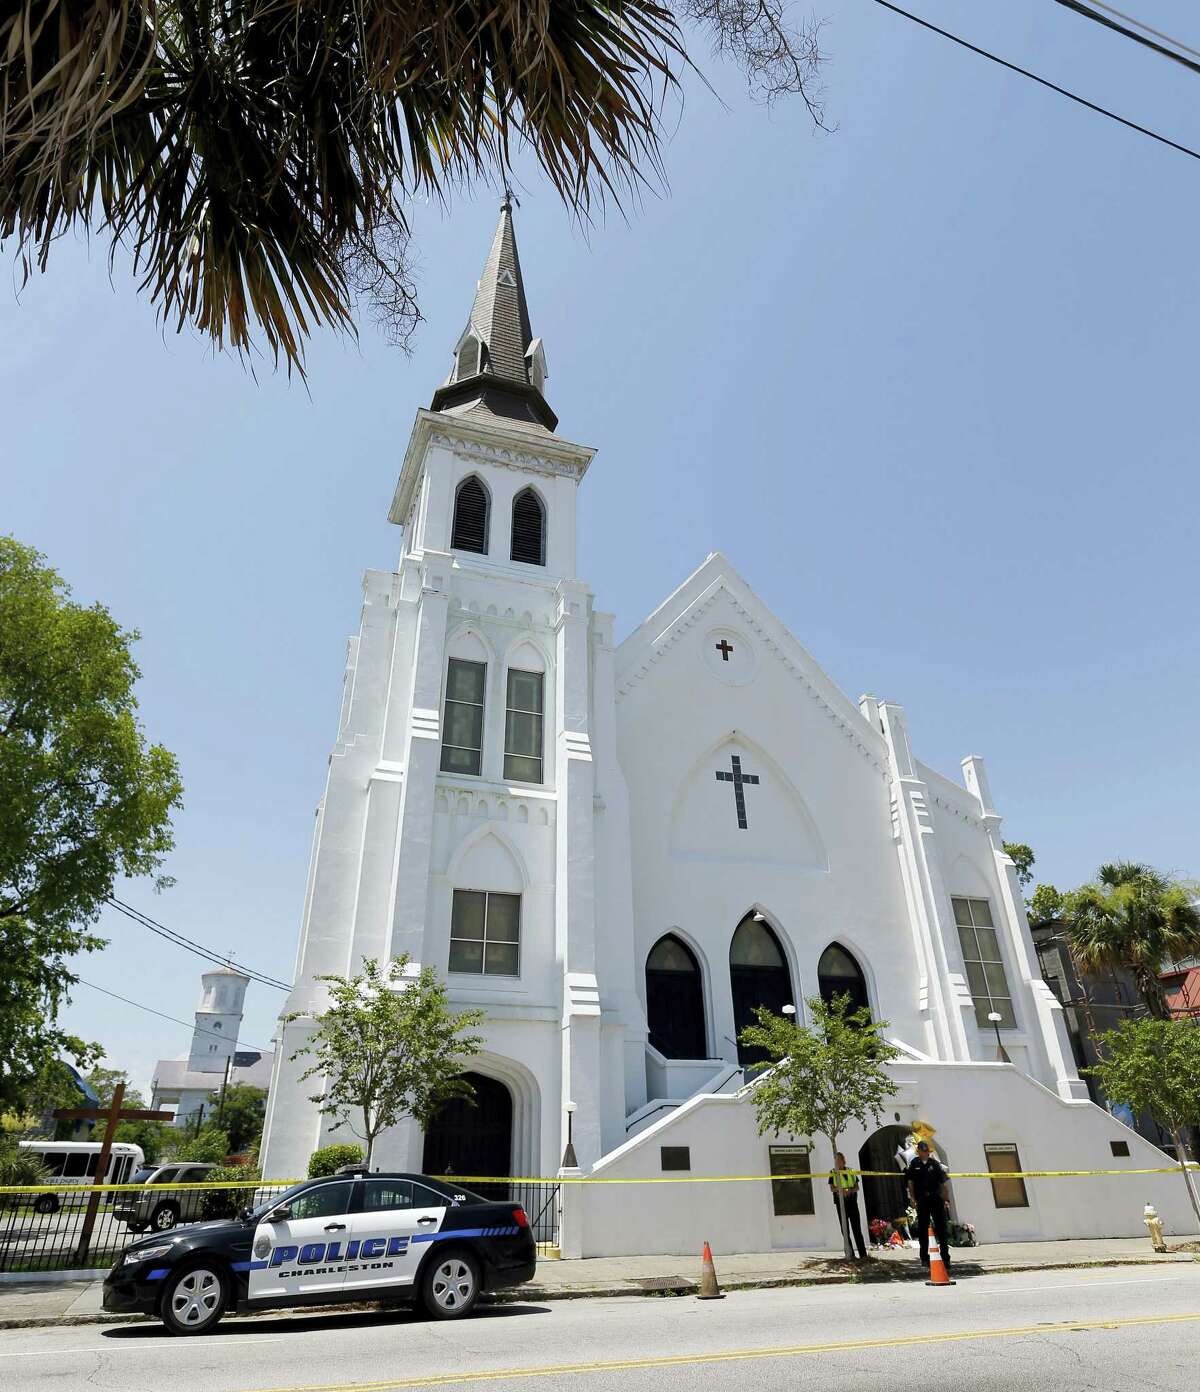 Two Charleston police officers stand in front of the Emanuel AME Church in 2015, following a shooting.